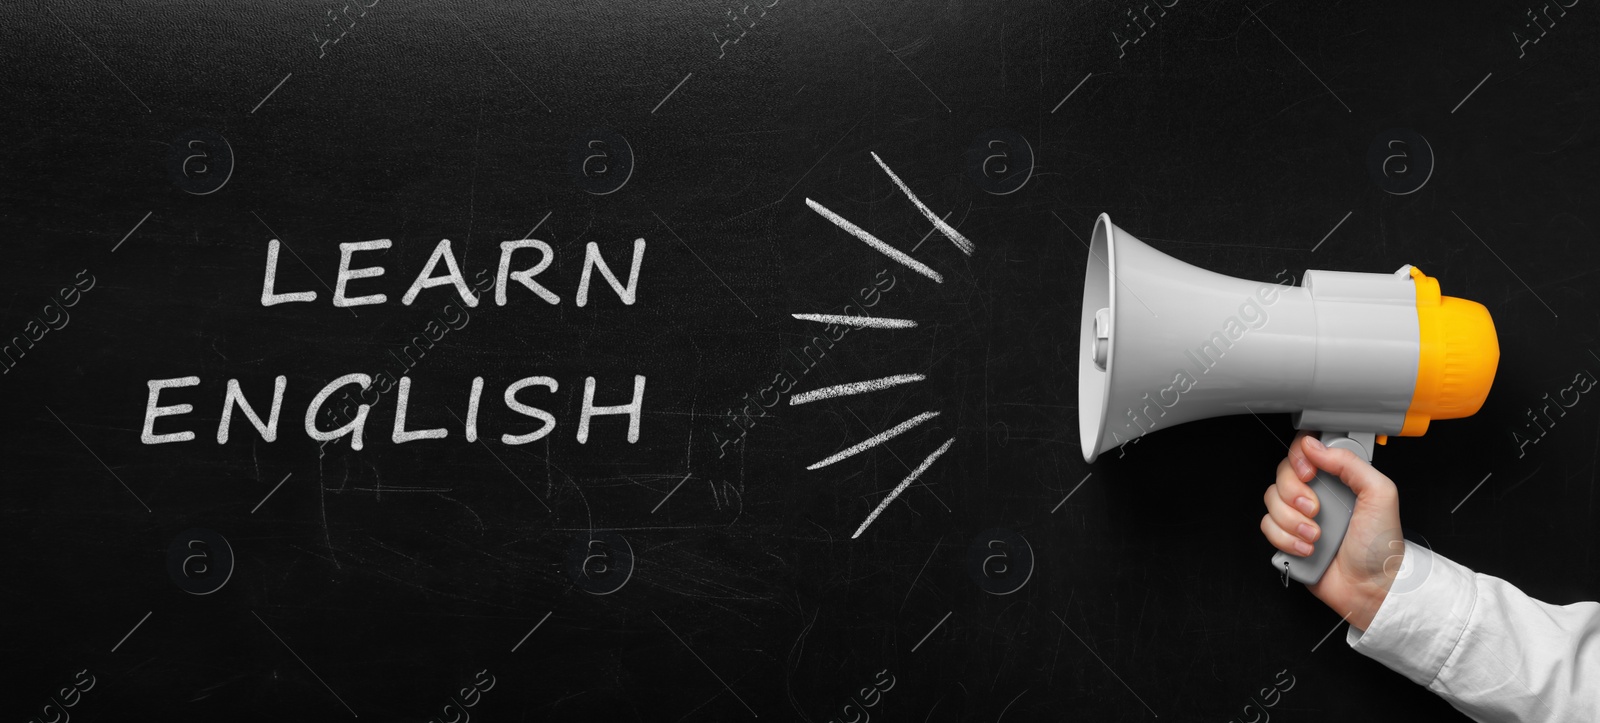 Image of Man holding megaphone near blackboard with text Learn English, closeup. Banner design